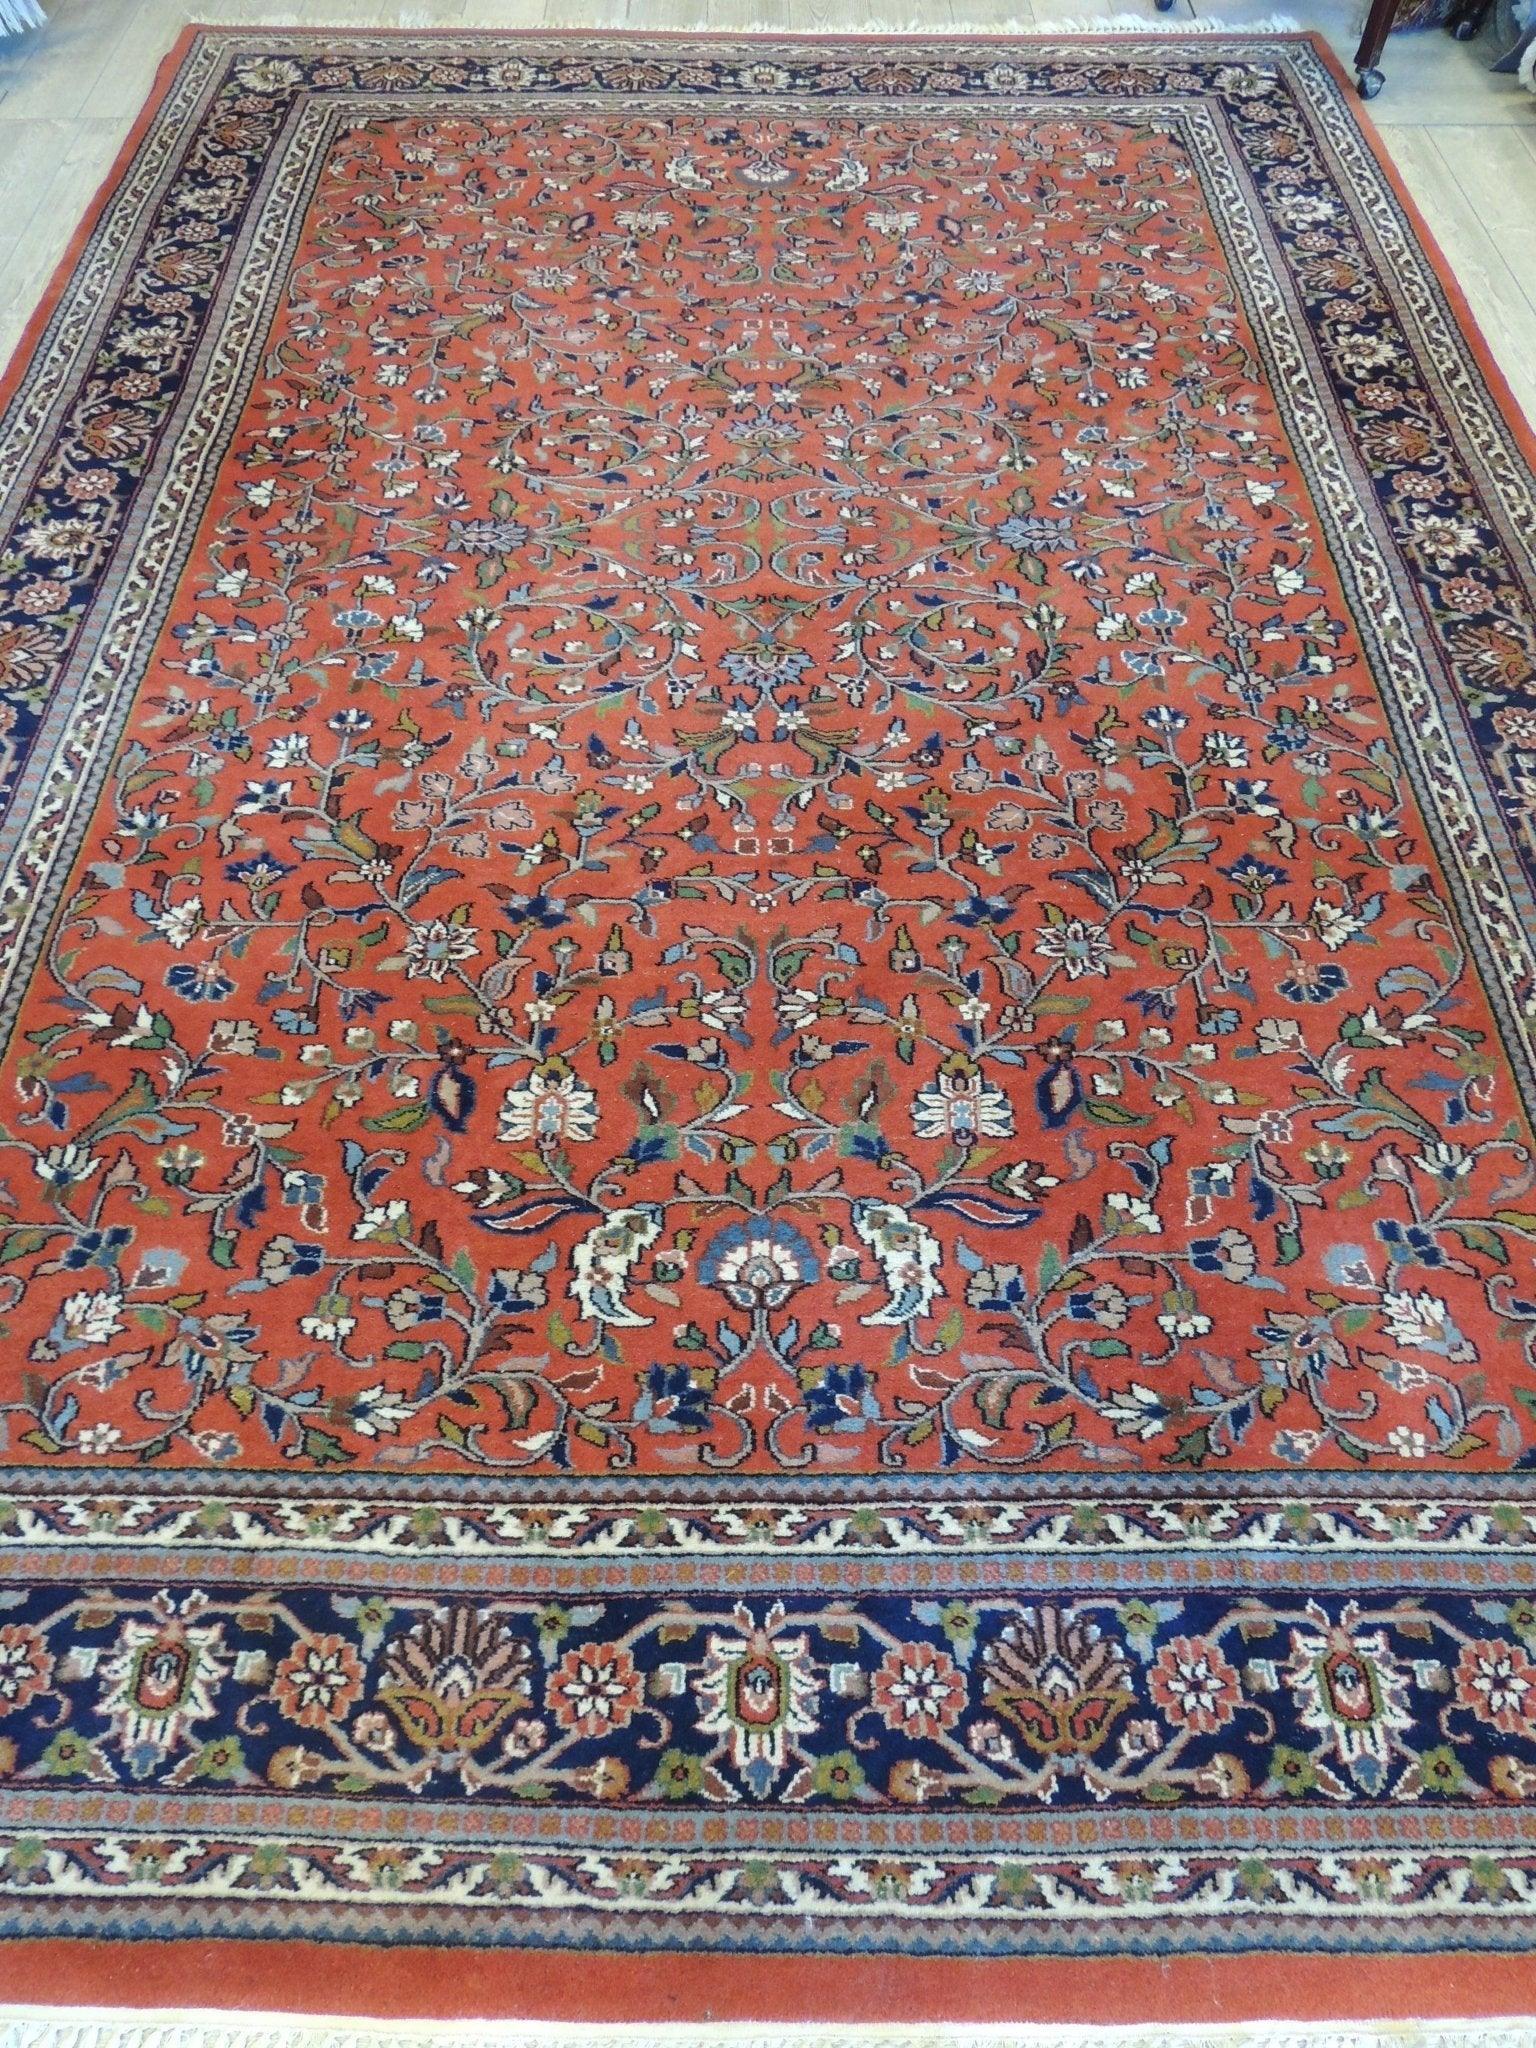 Exquisite Vintage Hand-Knotted Indo-Persian Rug 11x8 Ft